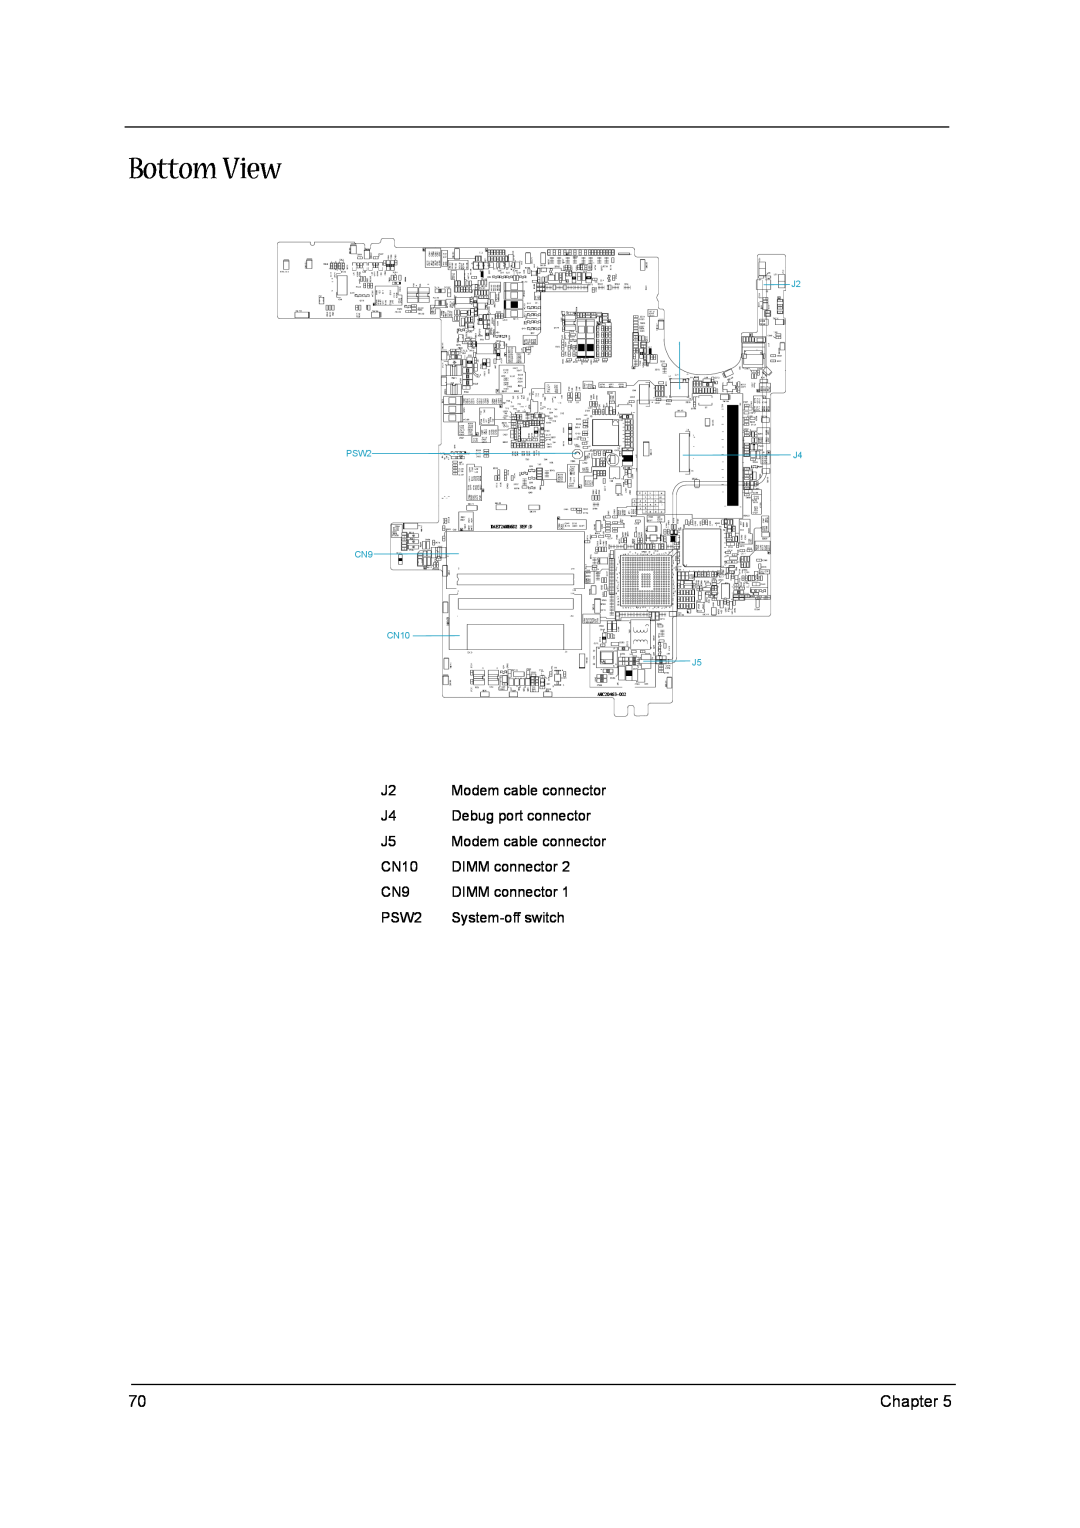 Acer 1300 Series manual Bottom View, PSW2, CN10 